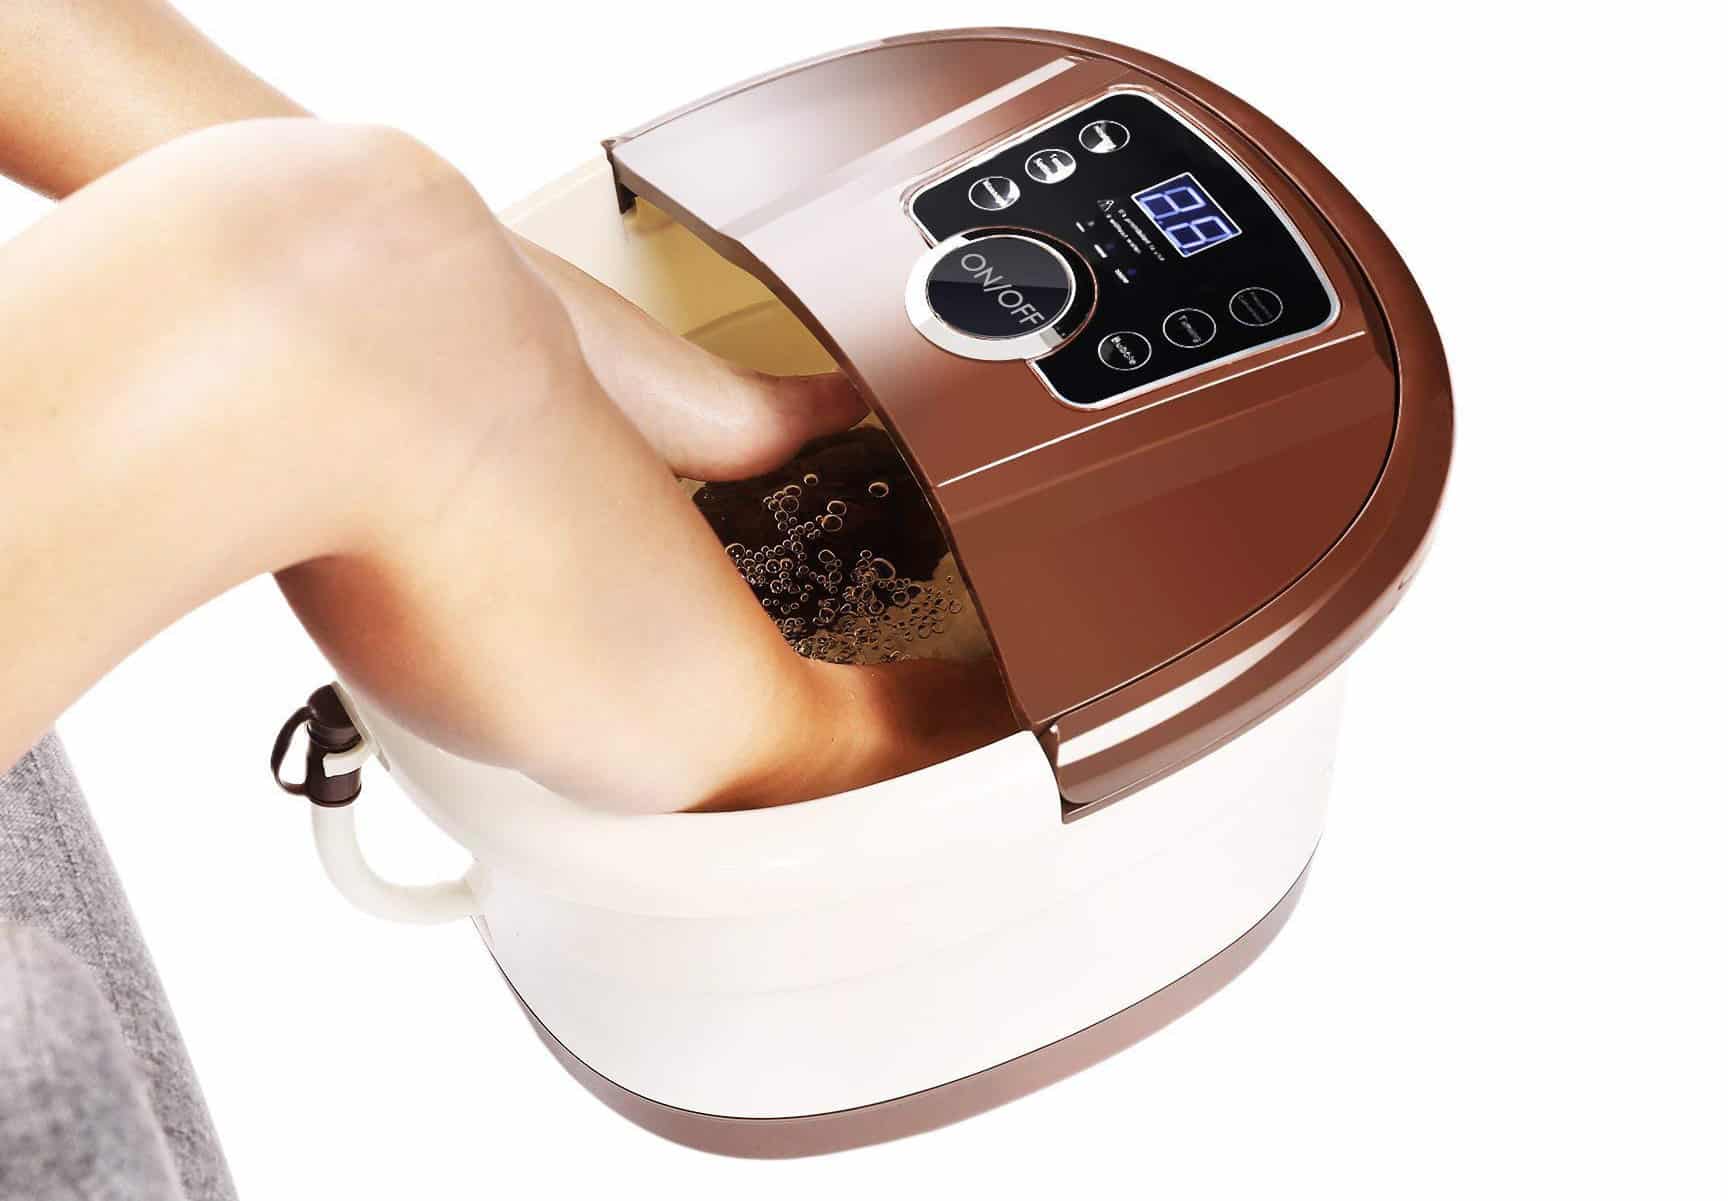 How To Use A Foot Spa